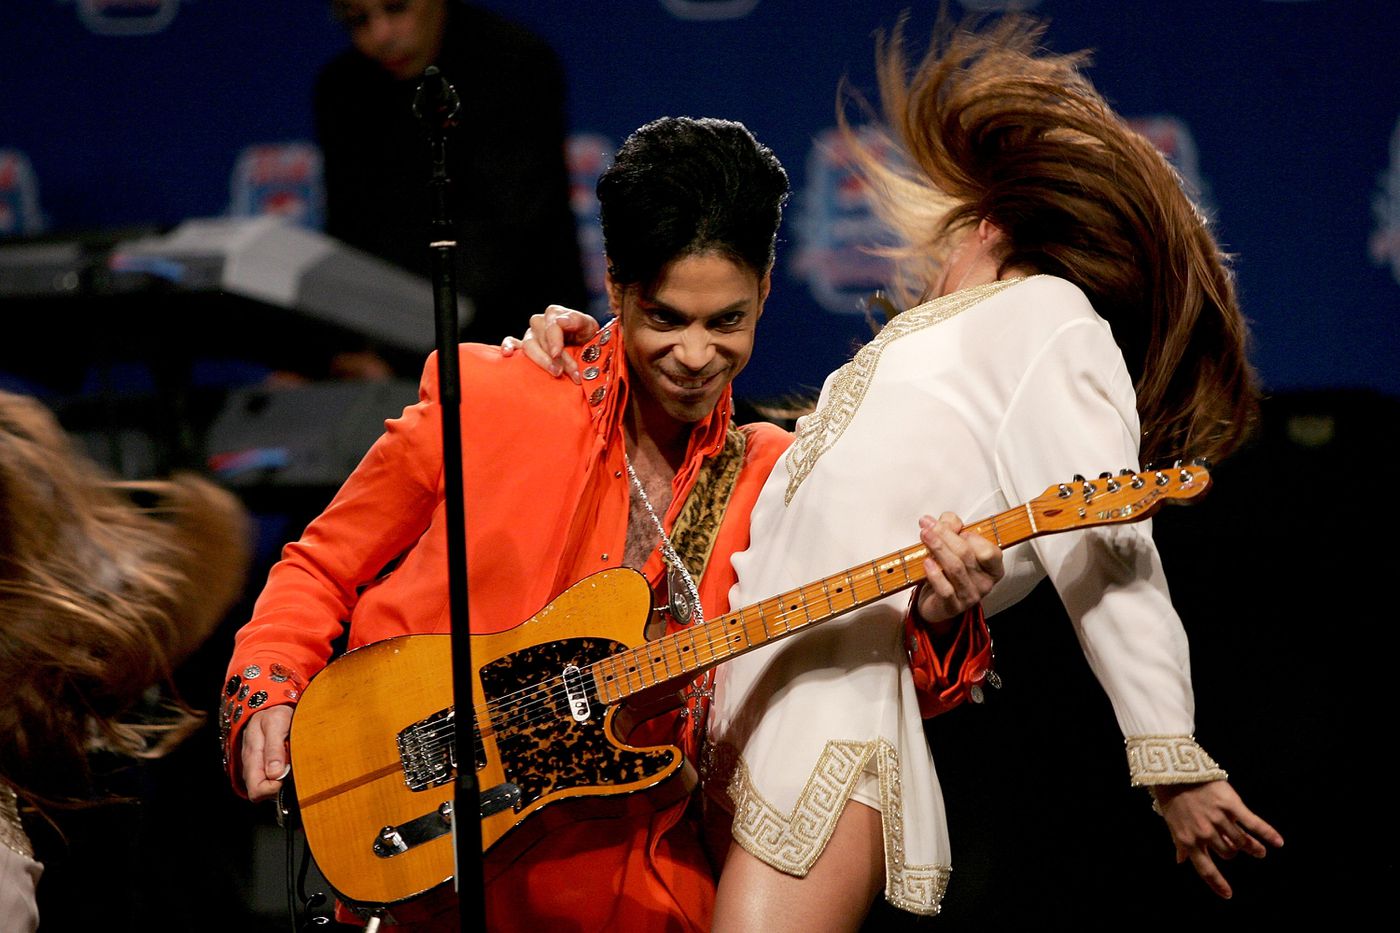 Prince On Stage With A Woman